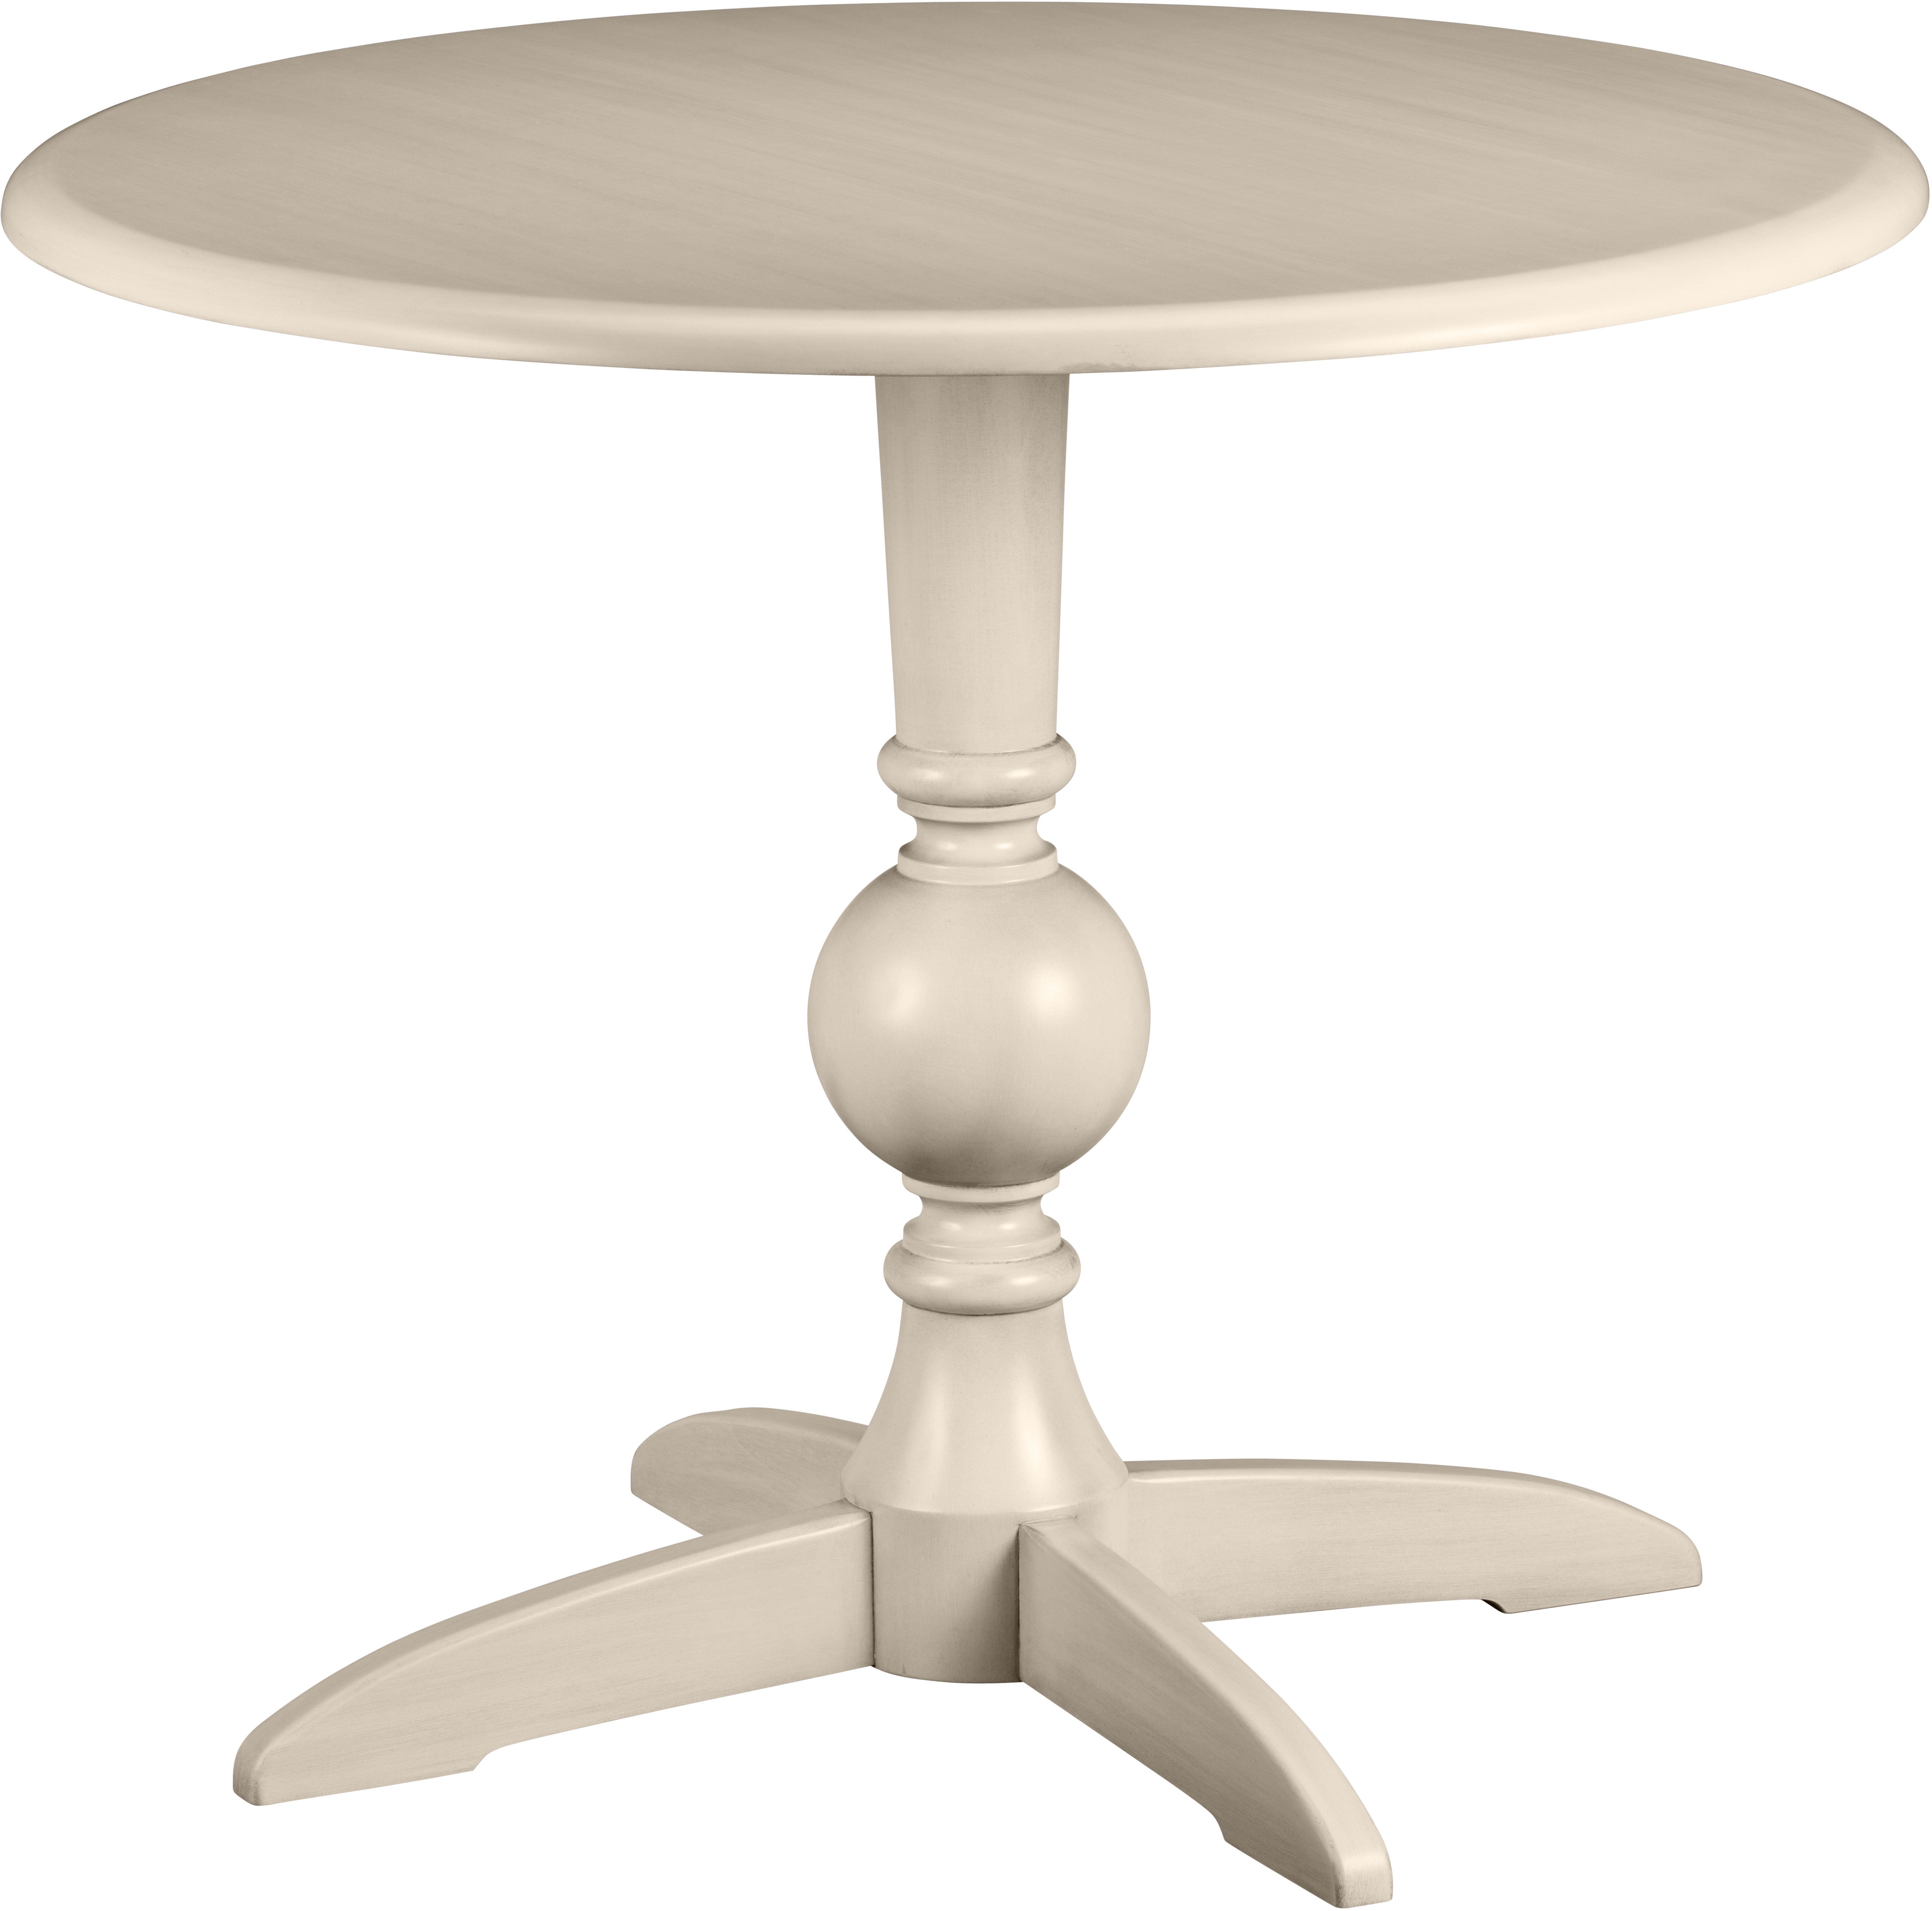 East West Furniture Antique 36 Inch Pedestal Round Dining Table